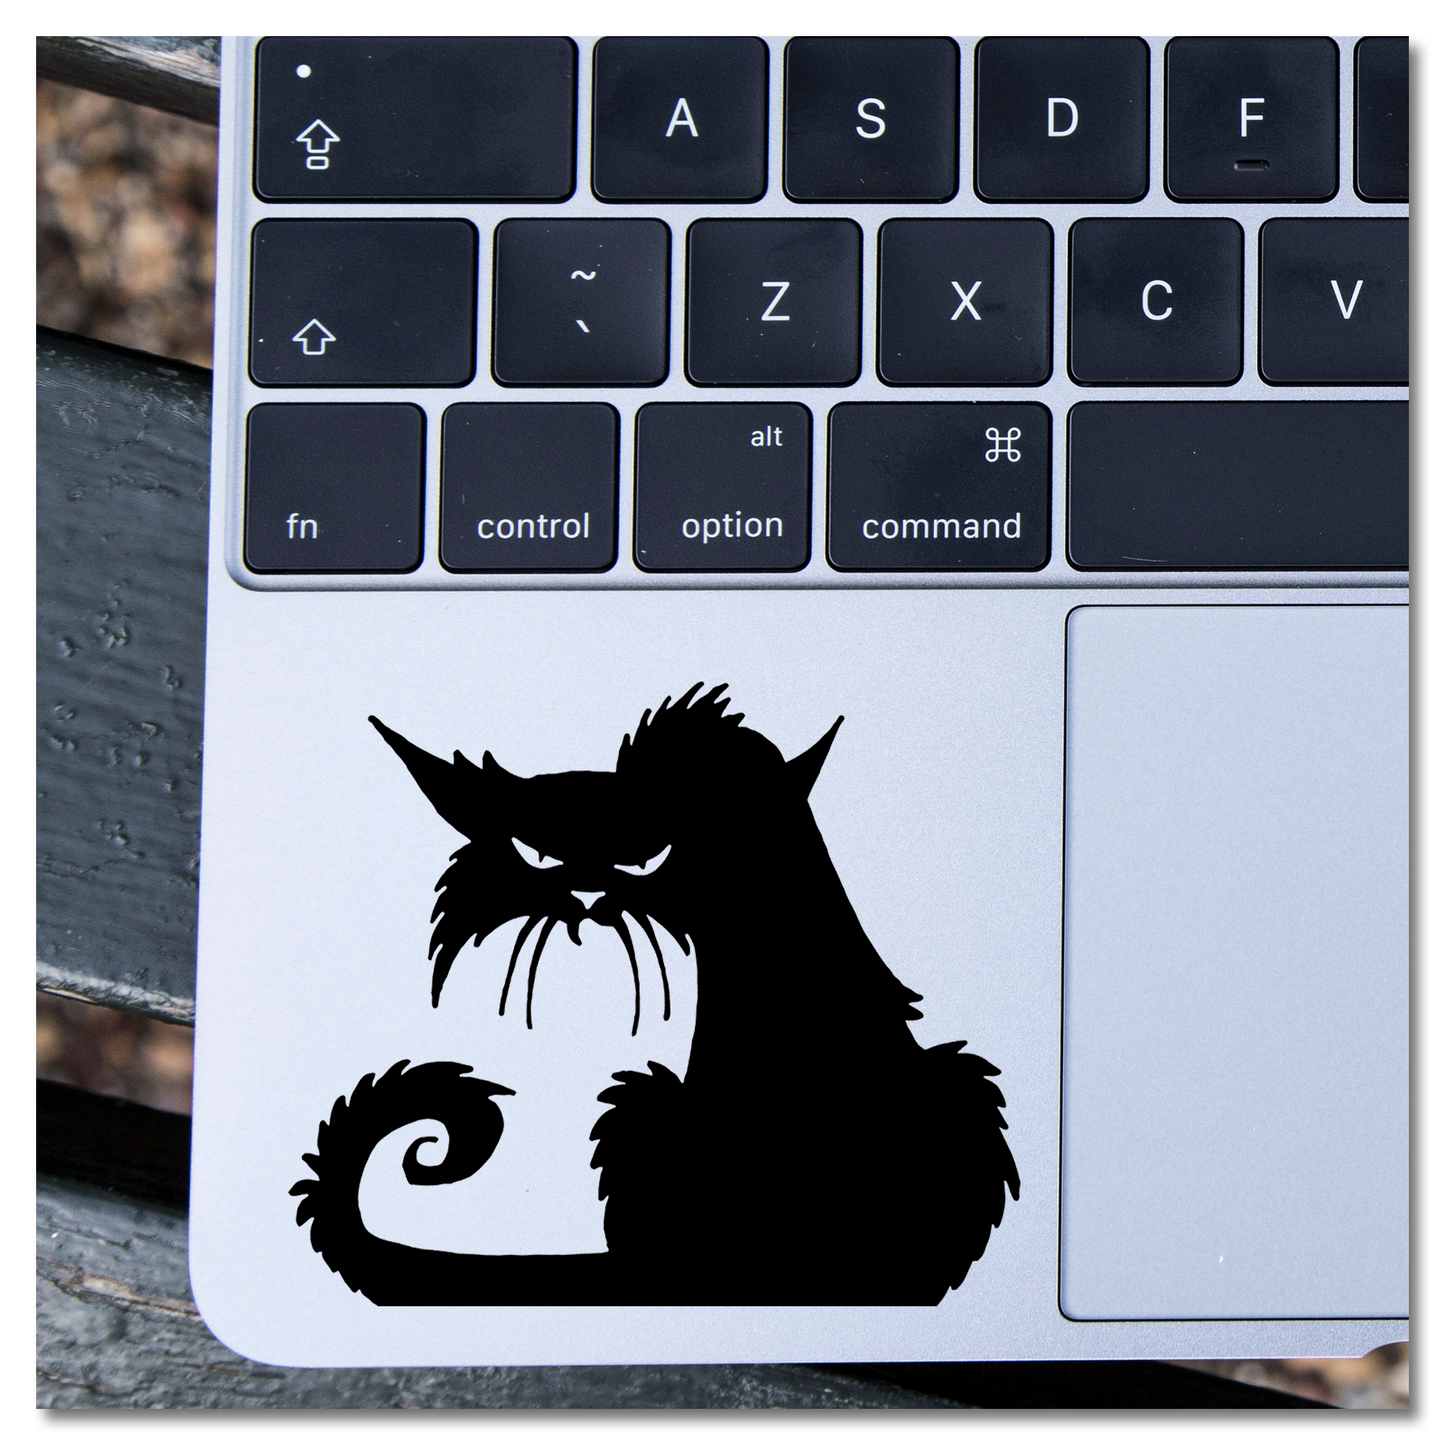 Angry Cat Vinyl Decal Sticker